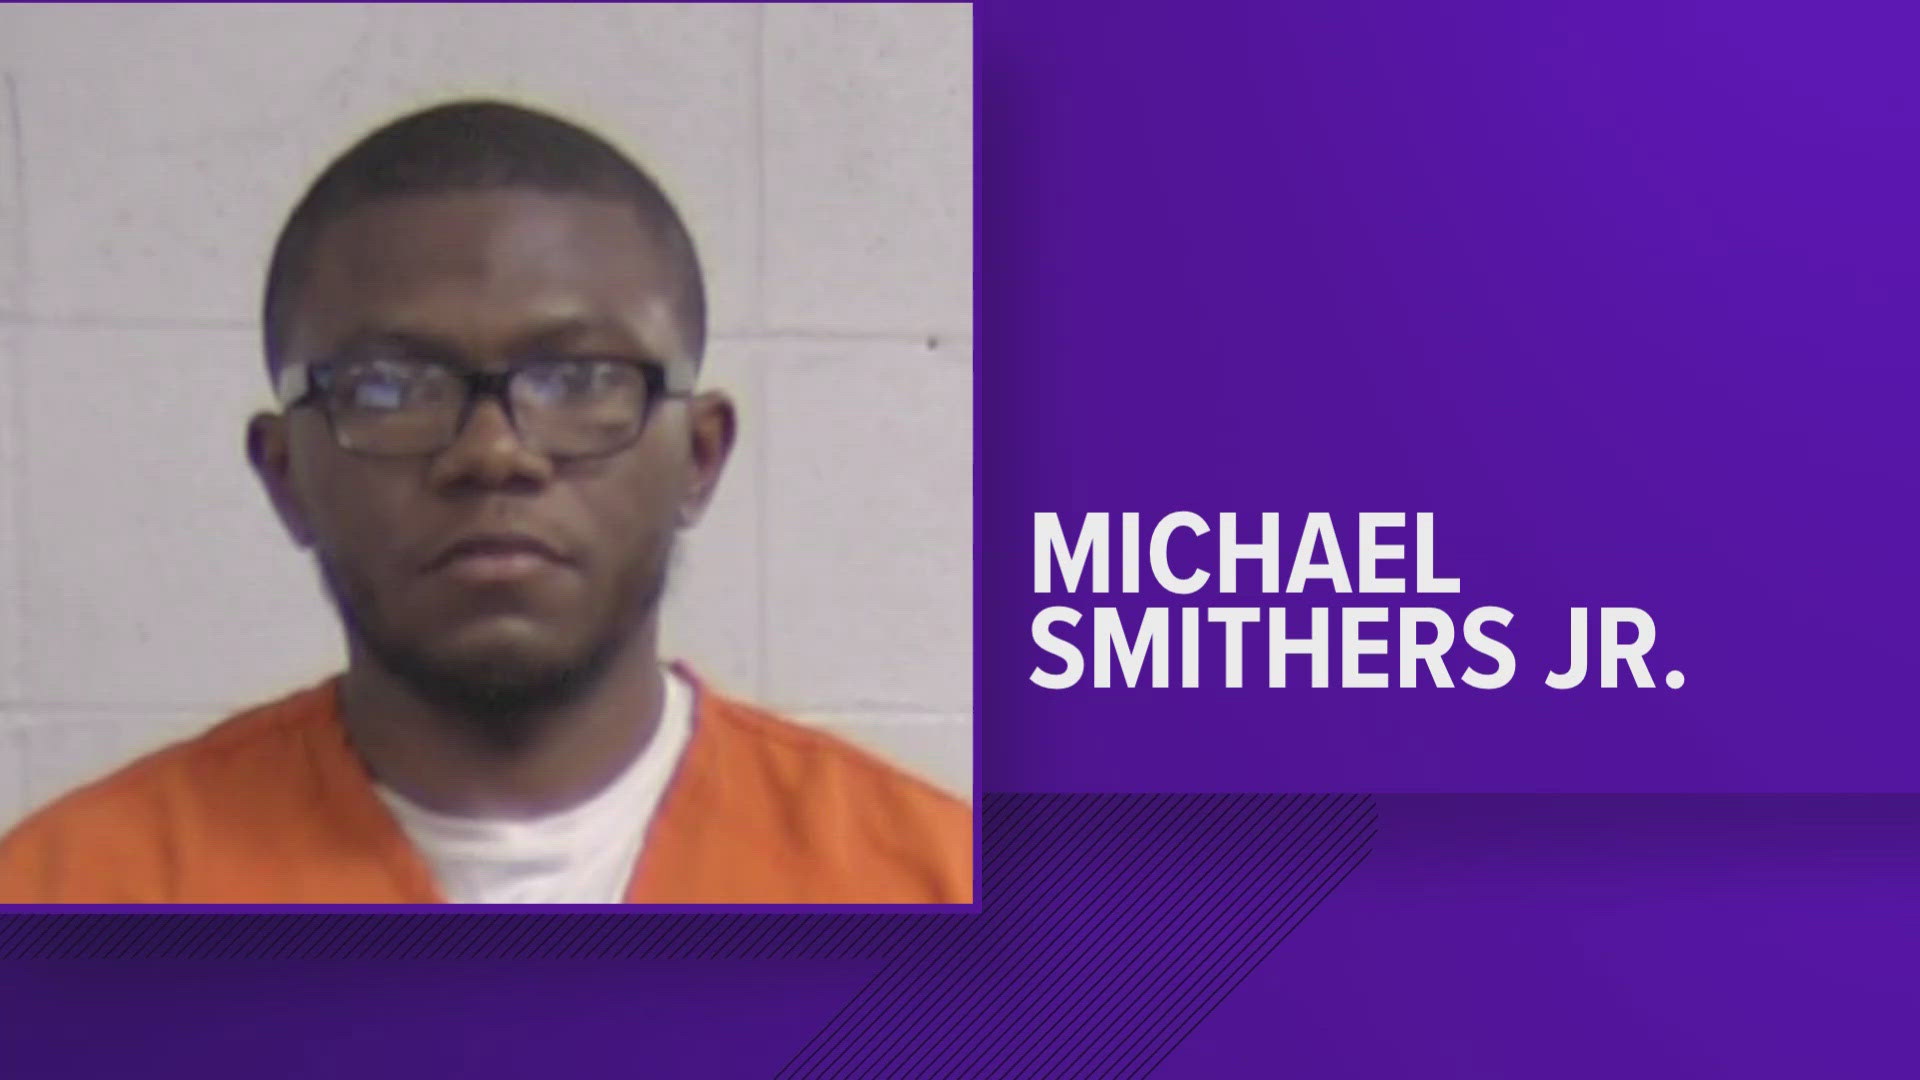 Michael Smithers Jr. has been sentenced to 25 years behind bars for complicity to murder in the Feb. 2018 death of 18-year-old Chatariona Harrison.